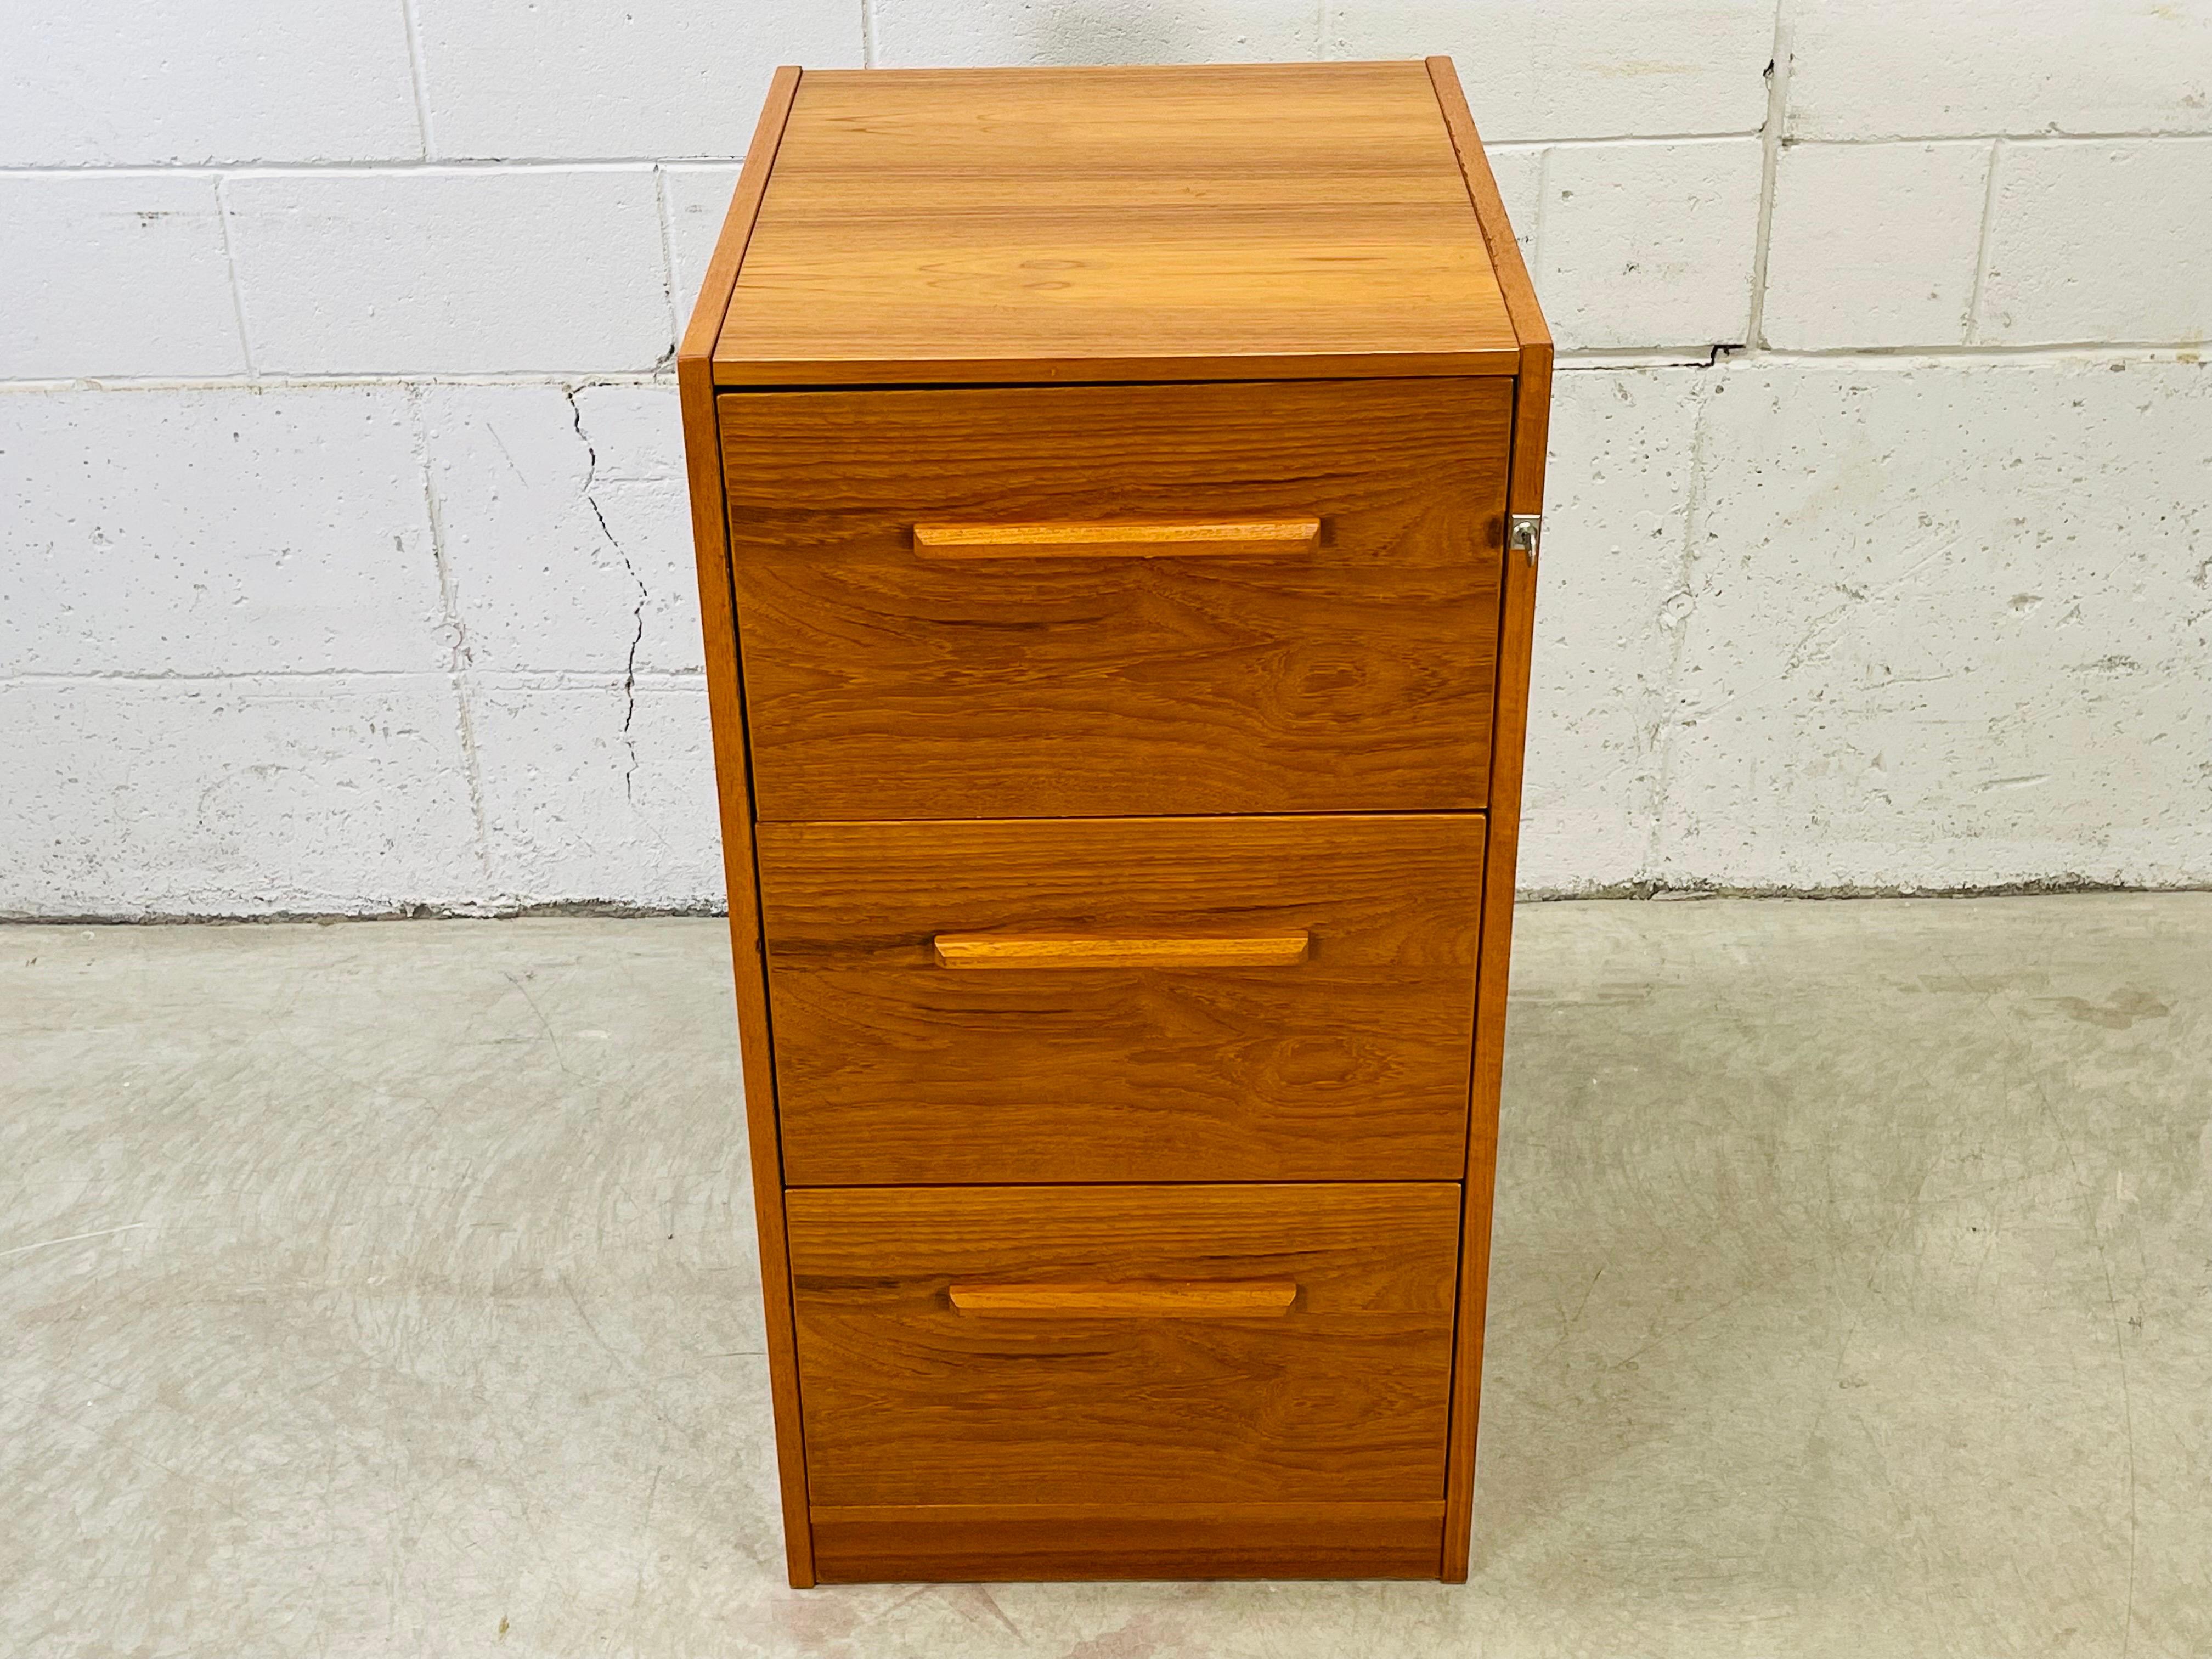 Vintage 1970s teak wood three drawer filing cabinet. All three drawers hold 15”W file folders (legal size) and comes with one key for the lock. The lock is operational. The back of the cabinet is finished. All drawers open and close freely. No marks.